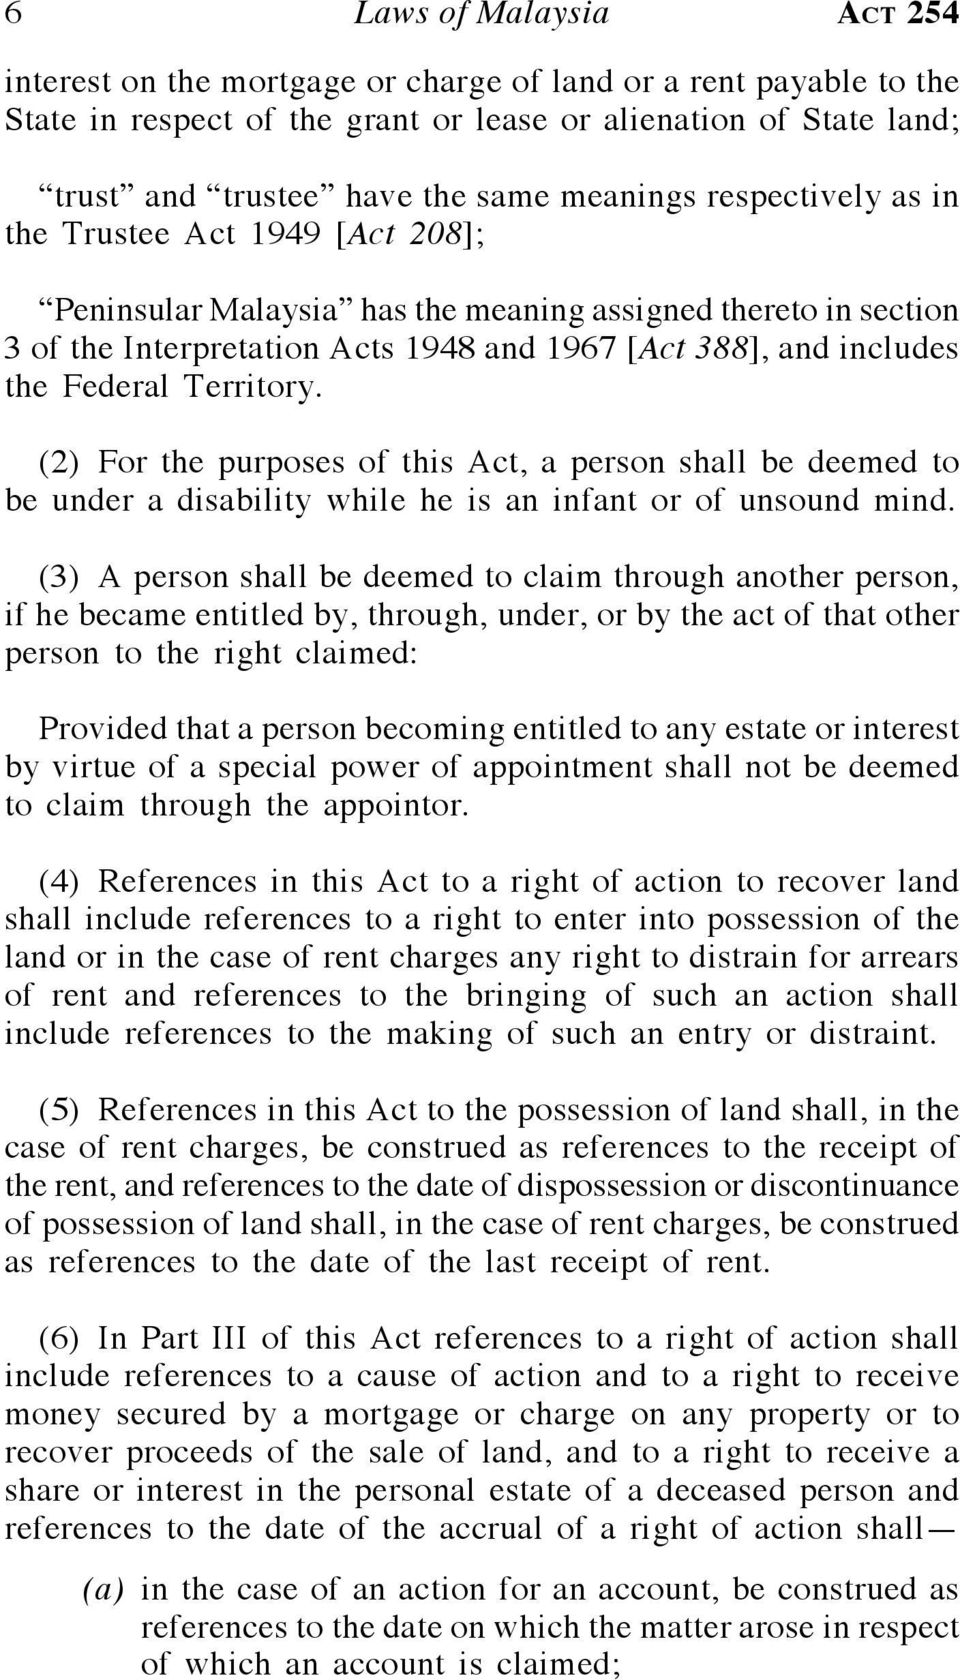 Federal Territory. (2) For the purposes of this Act, a person shall be deemed to be under a disability while he is an infant or of unsound mind.